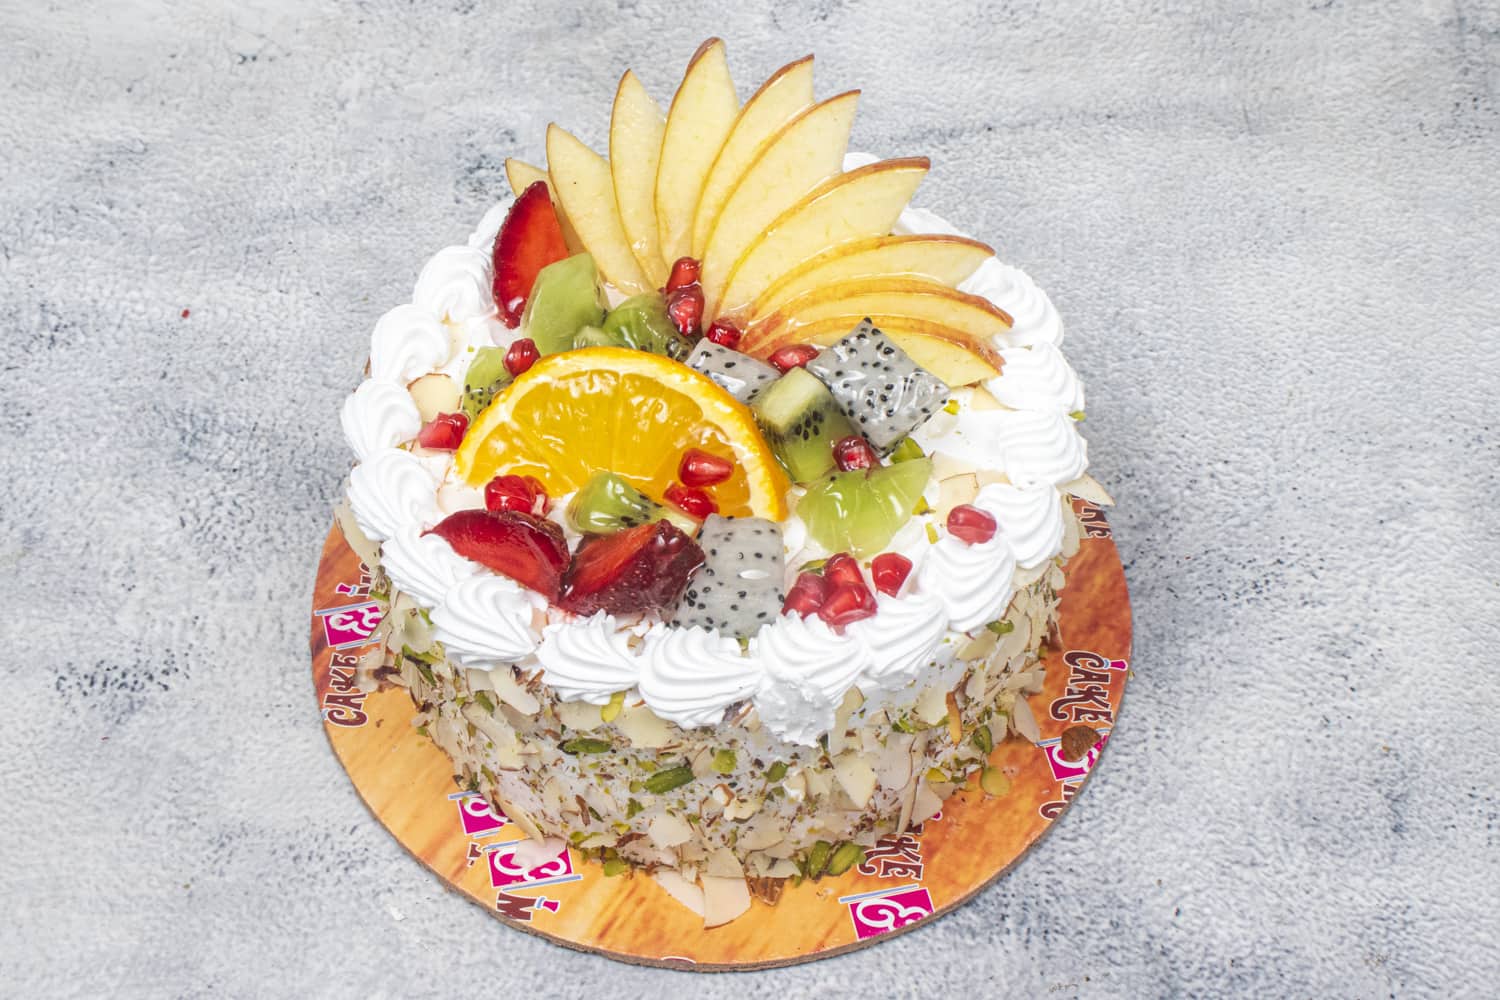 Buy Yumilicious Fresh Fruits Cake - Eggless Online at Best Price of Rs null  - bigbasket